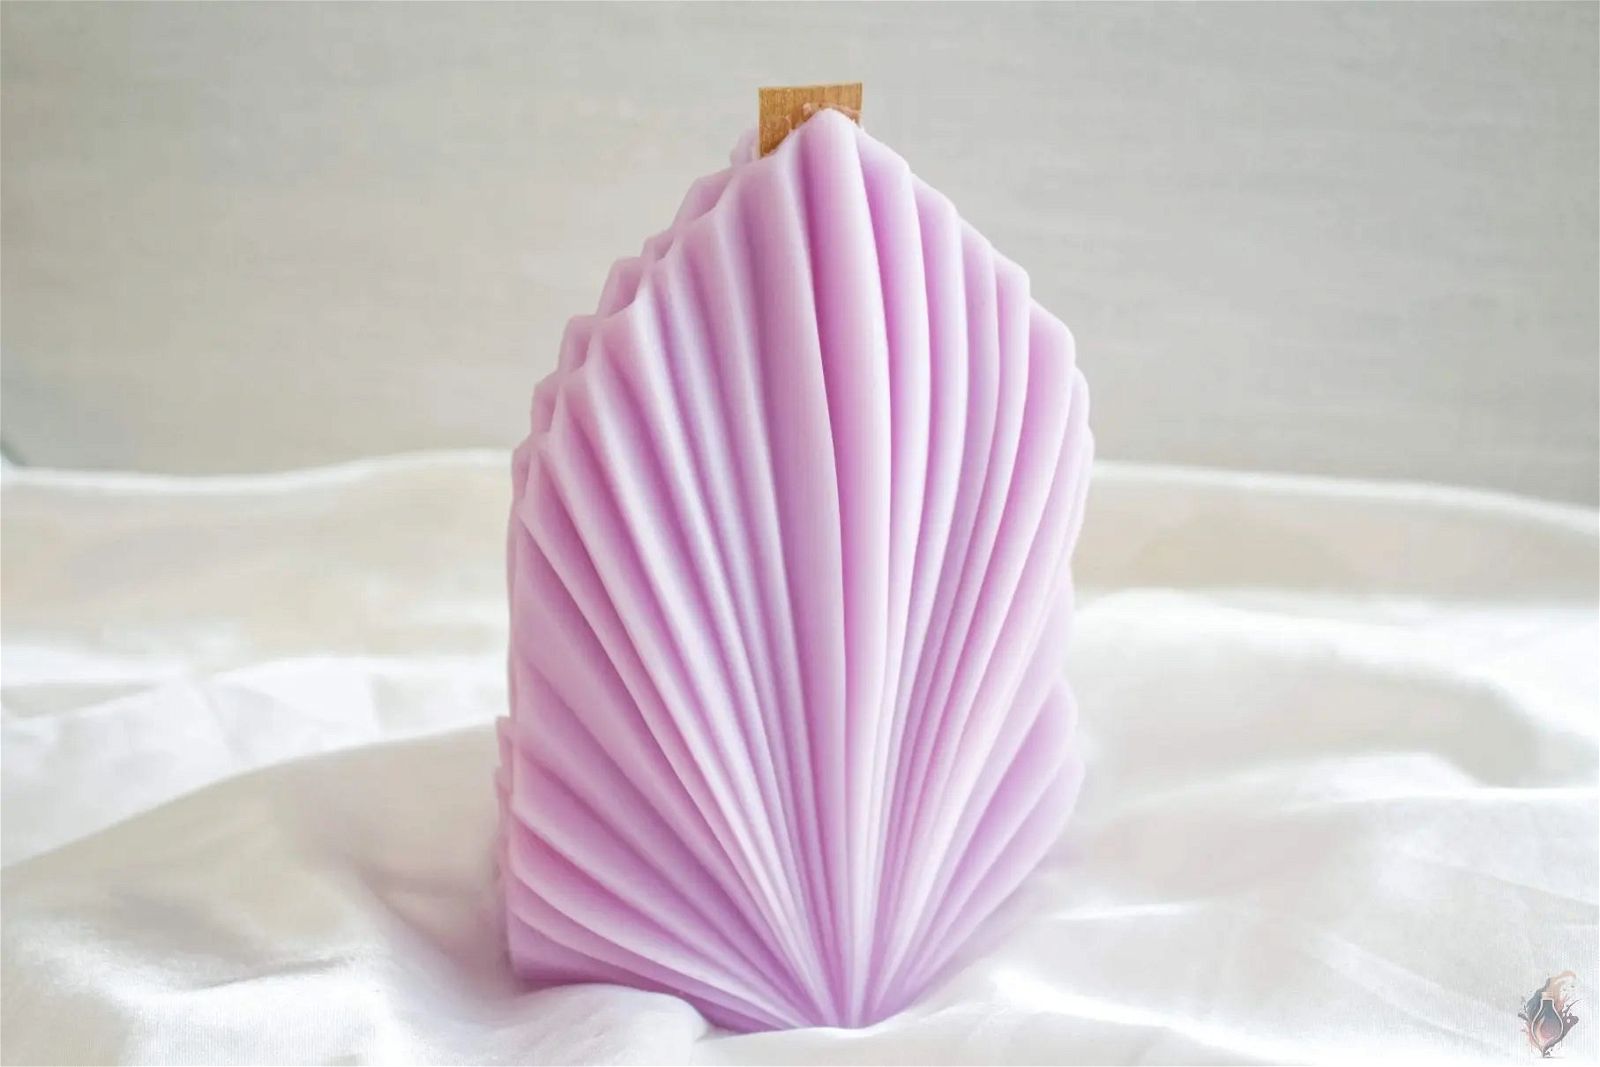 Wooden Wick Coral Shell Candle - Case of 5 - EKK Candle Art